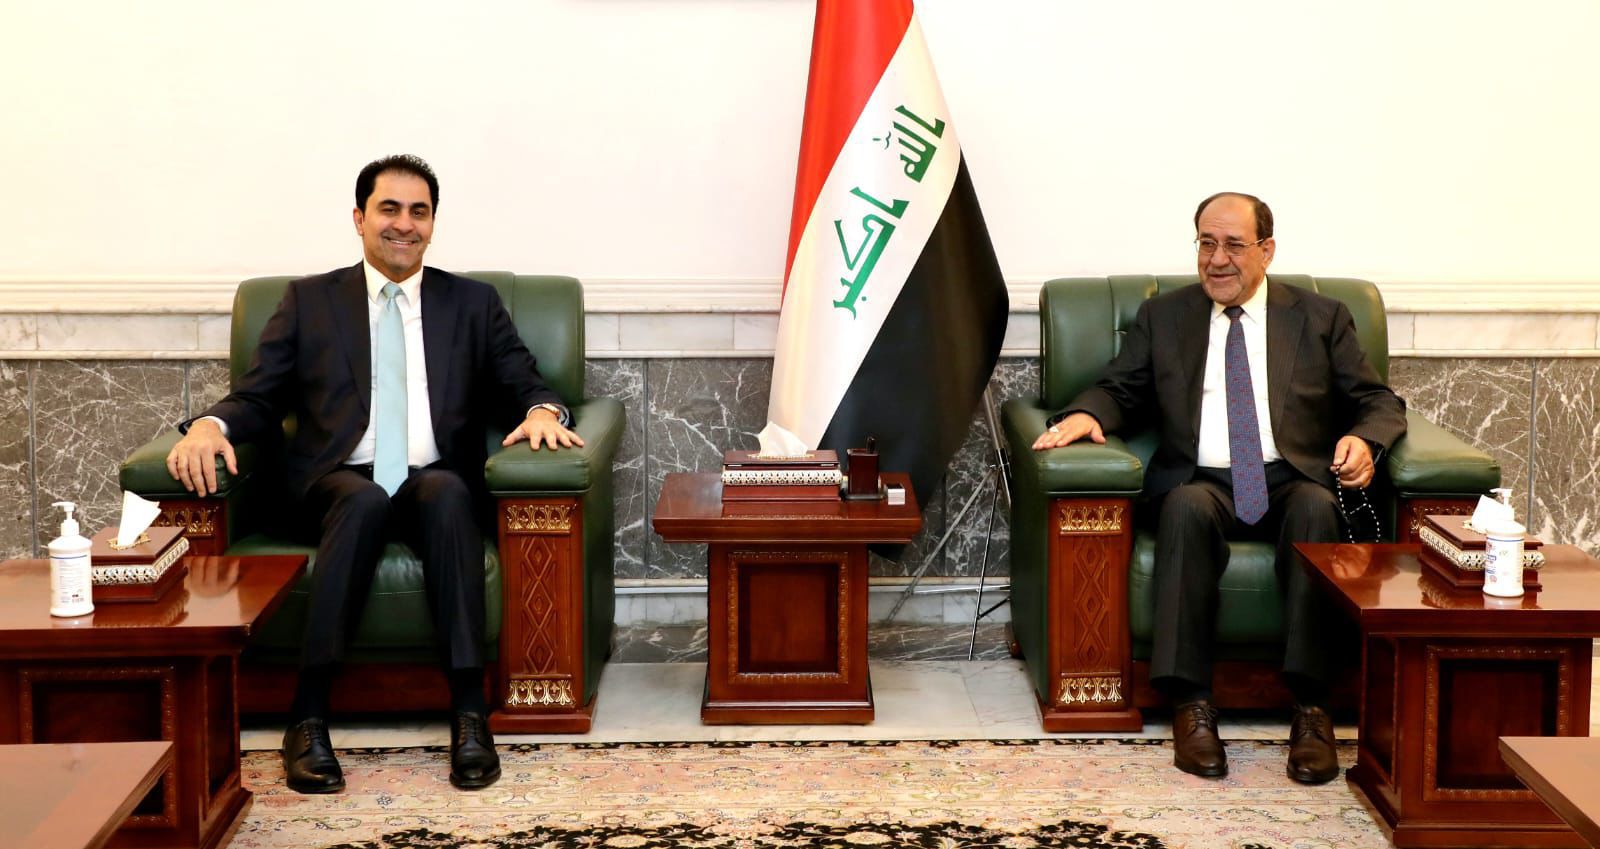 The Parliament Speakers file was settled at the table of Al-Mandalawi and Al-Maliki